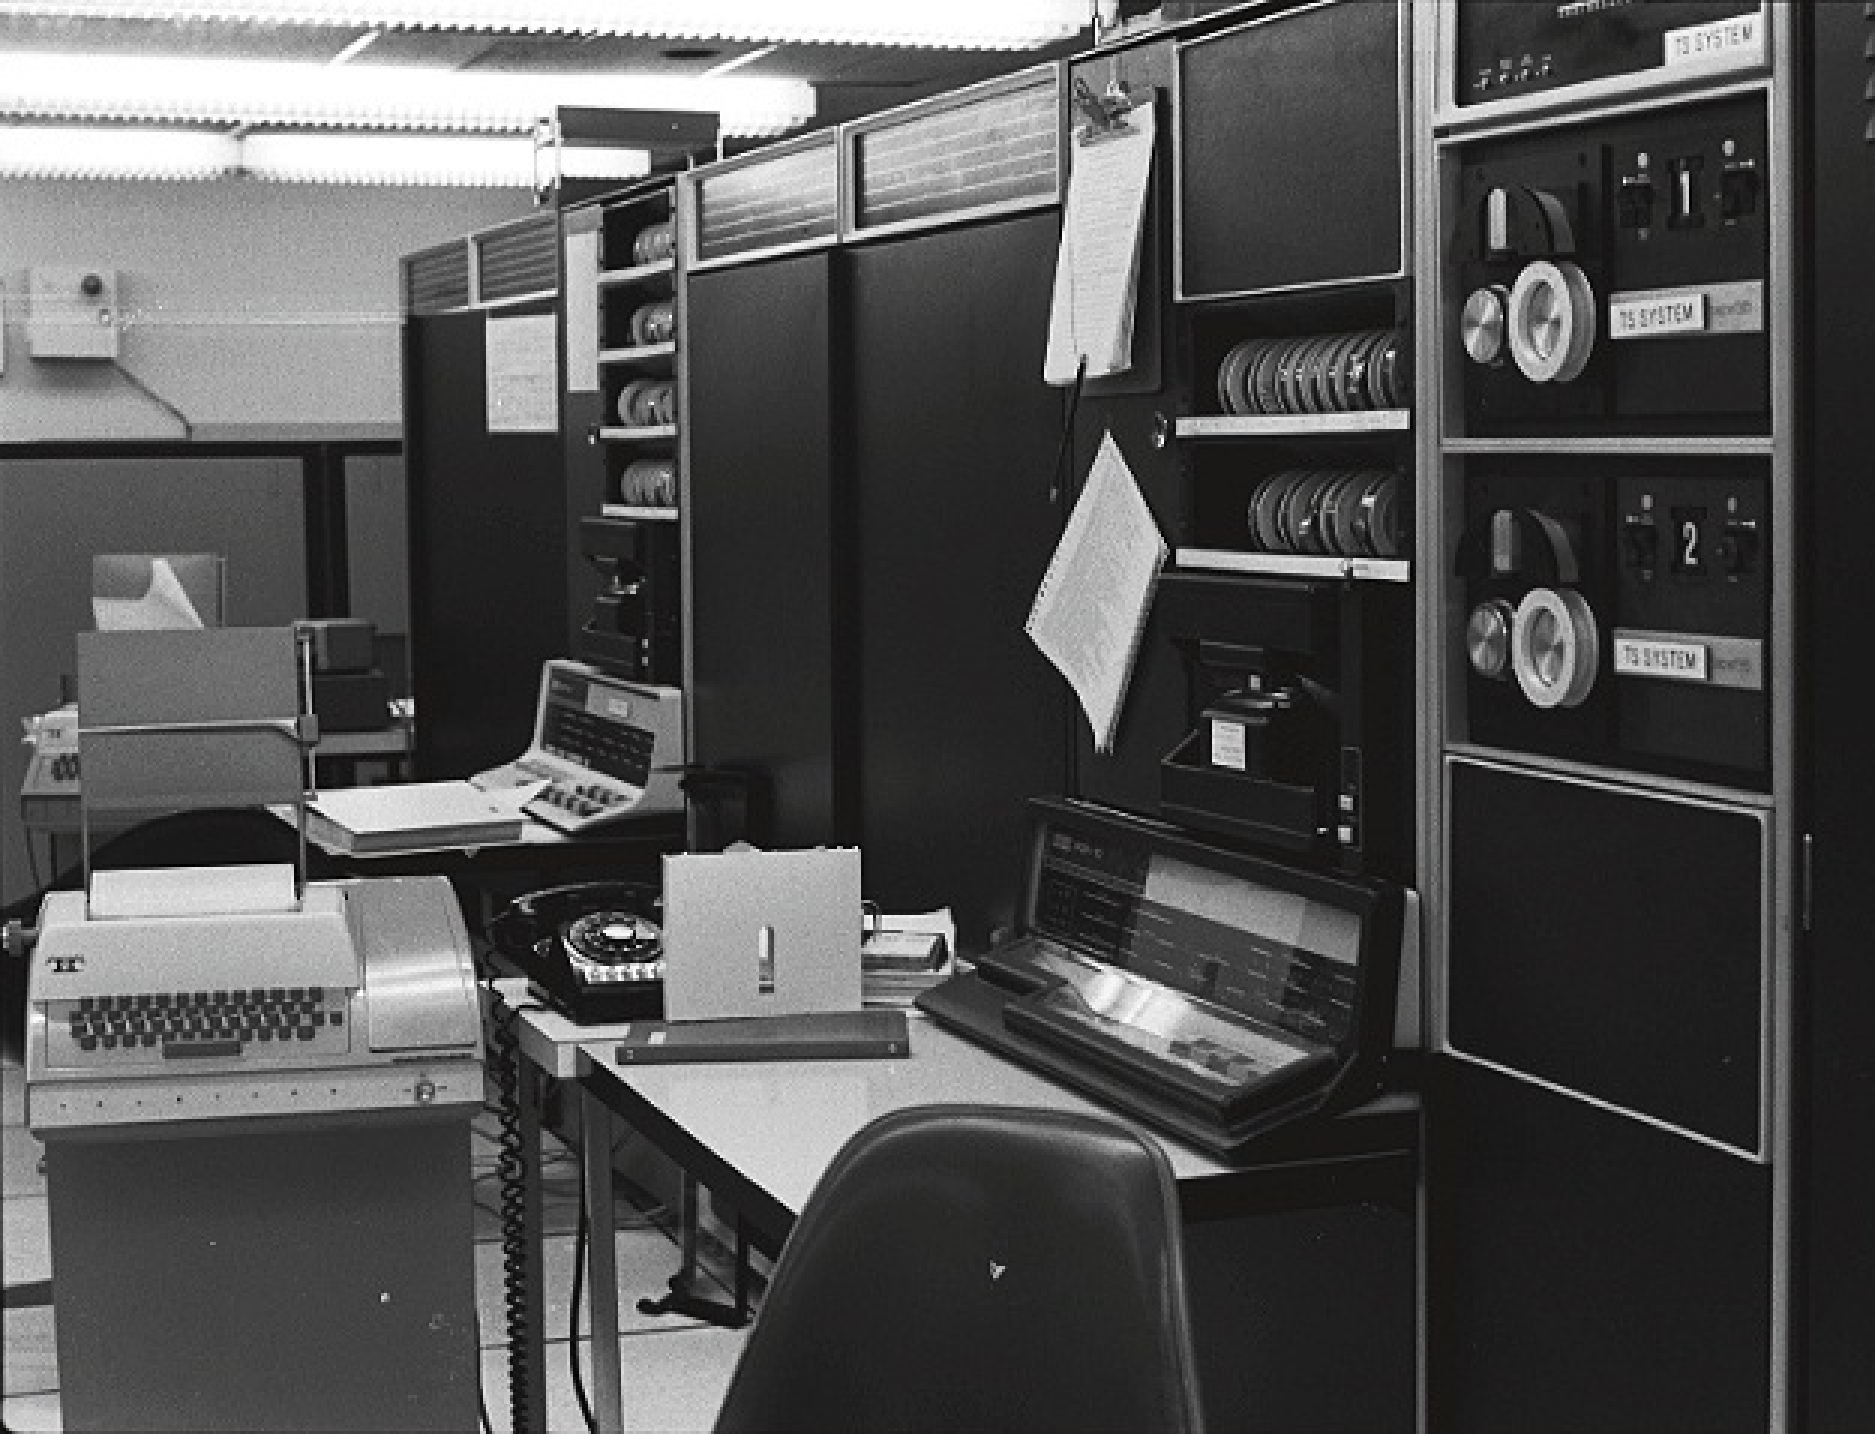 The first ARPANET email was sent between these two adjacent PDP-10 computers at BBN Technologies (connected only through the ARPANET). Image from Wikipedia.